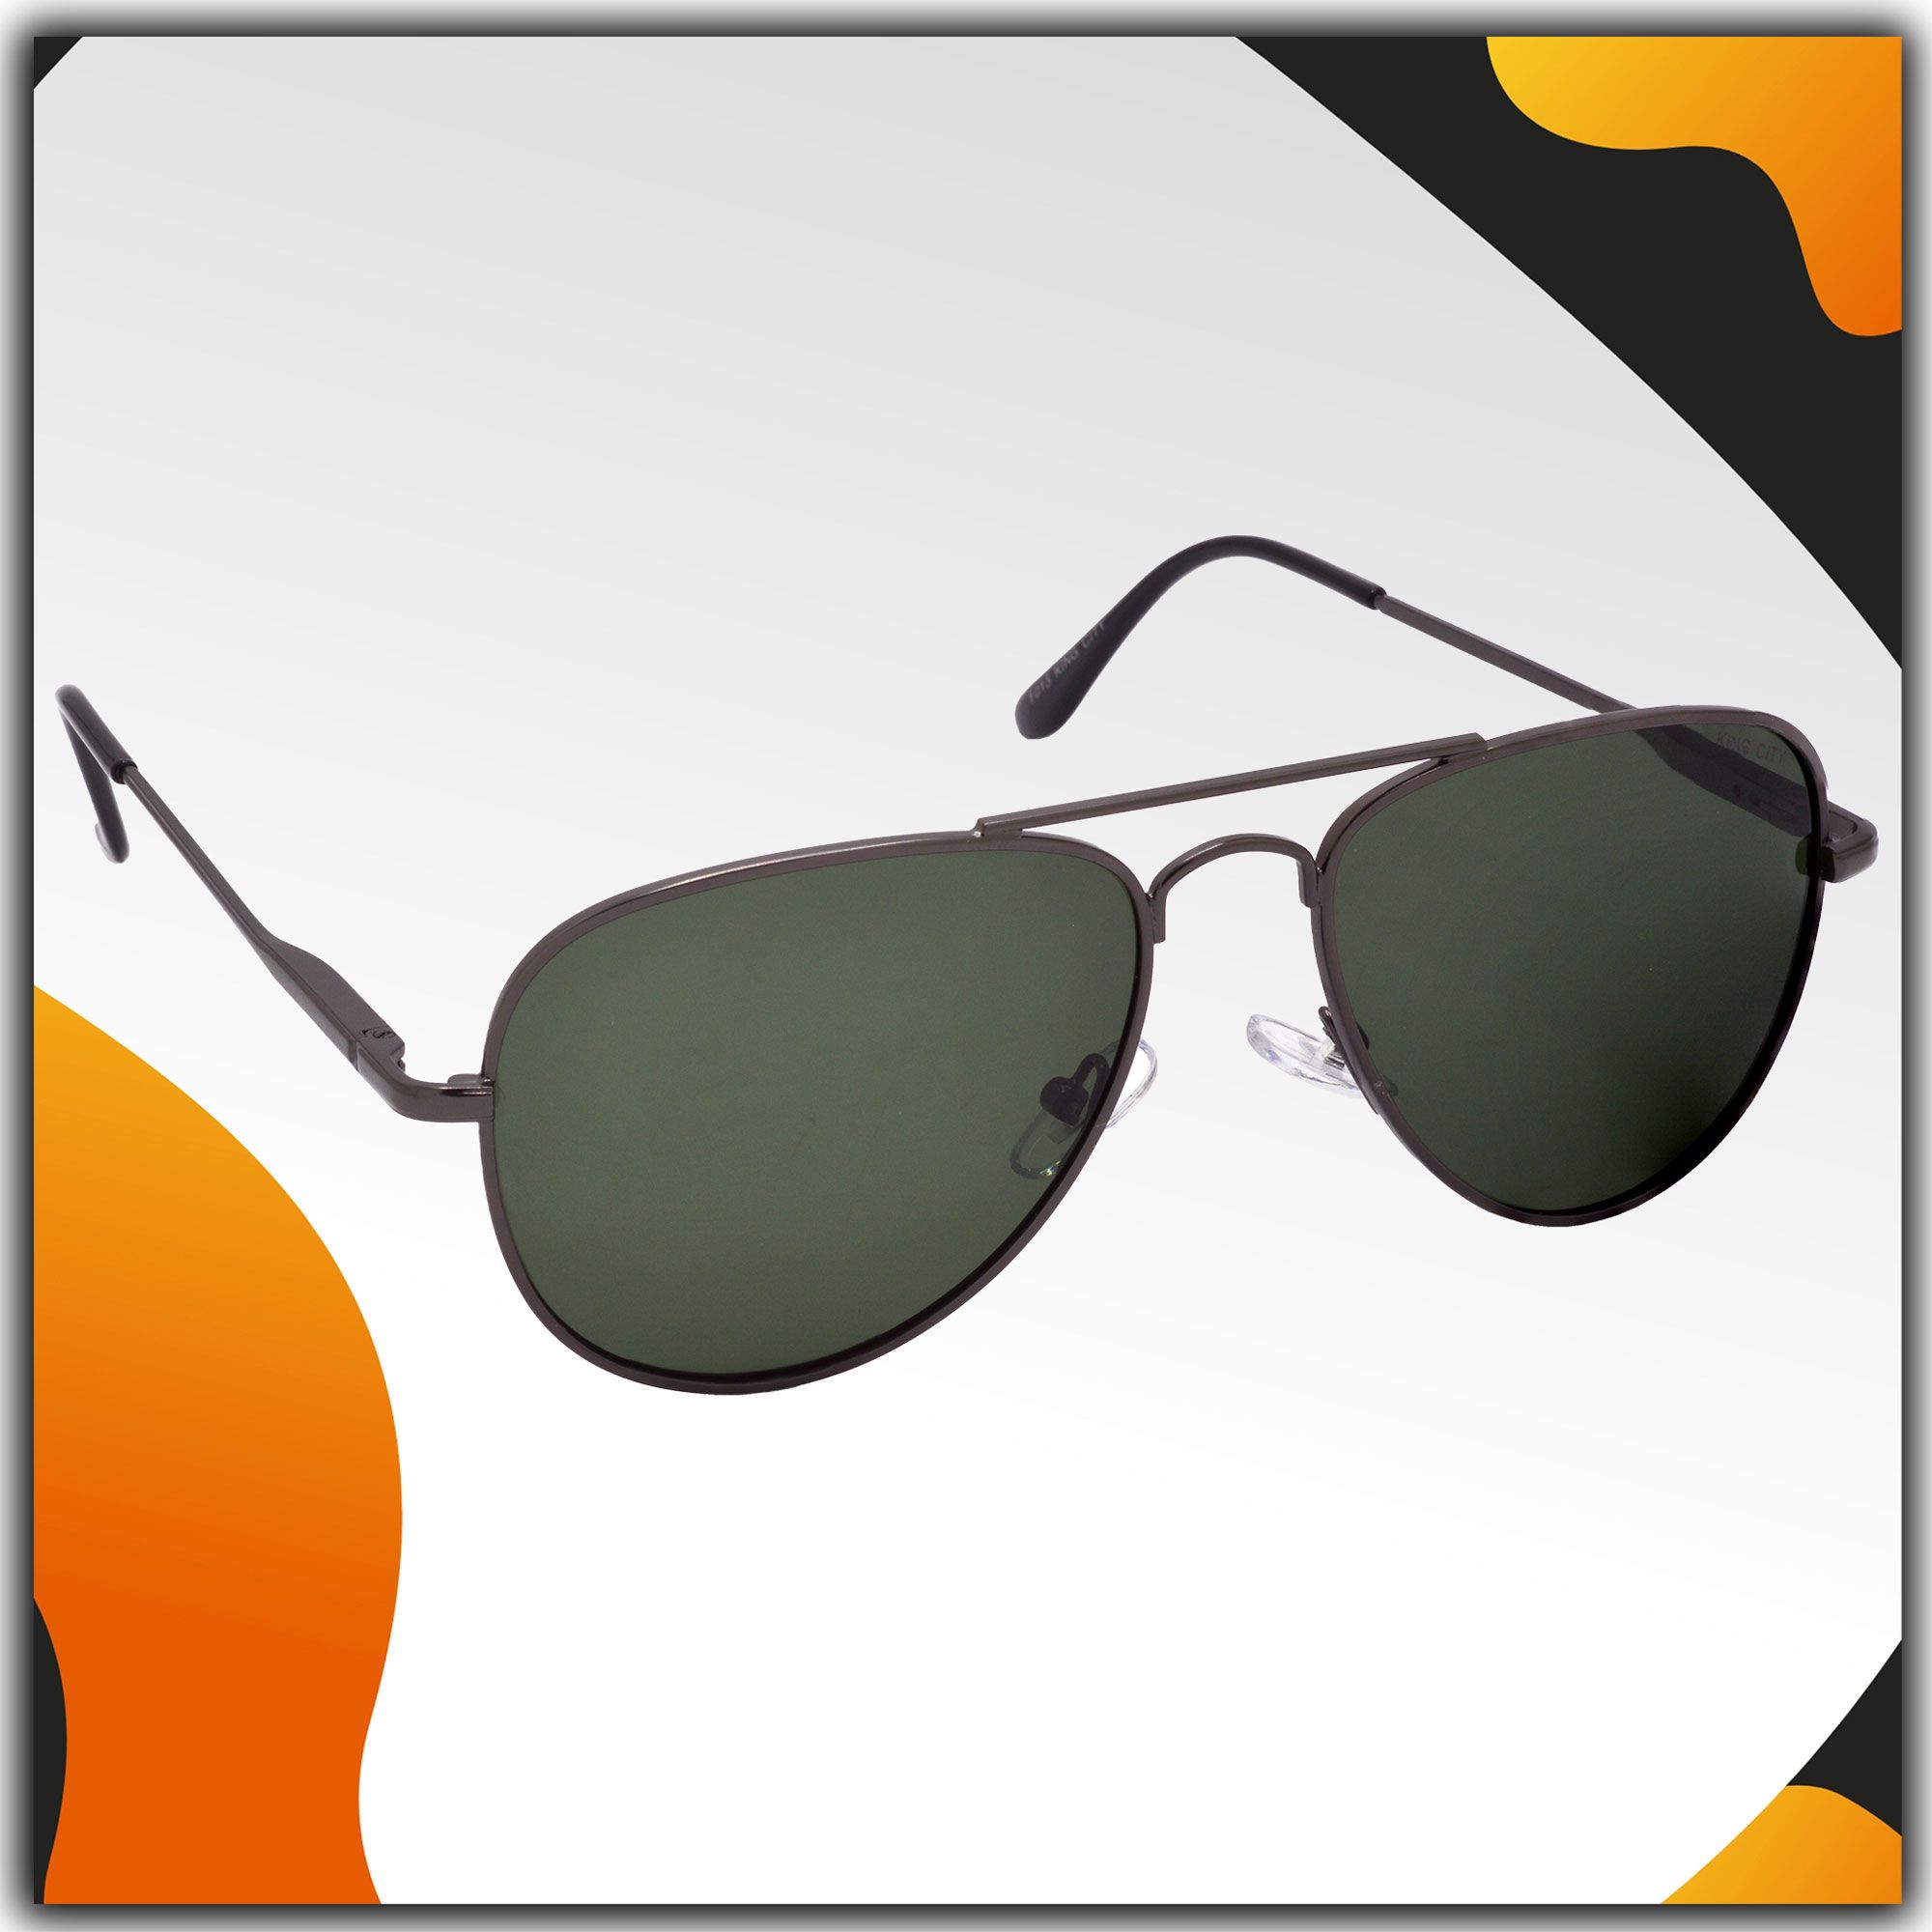 Stylish Pilot Full-Frame Metal Polarized Sunglasses for Men and Women | Green Lens and Grey Frame | HRS-KC1019-GRY-GRN-P